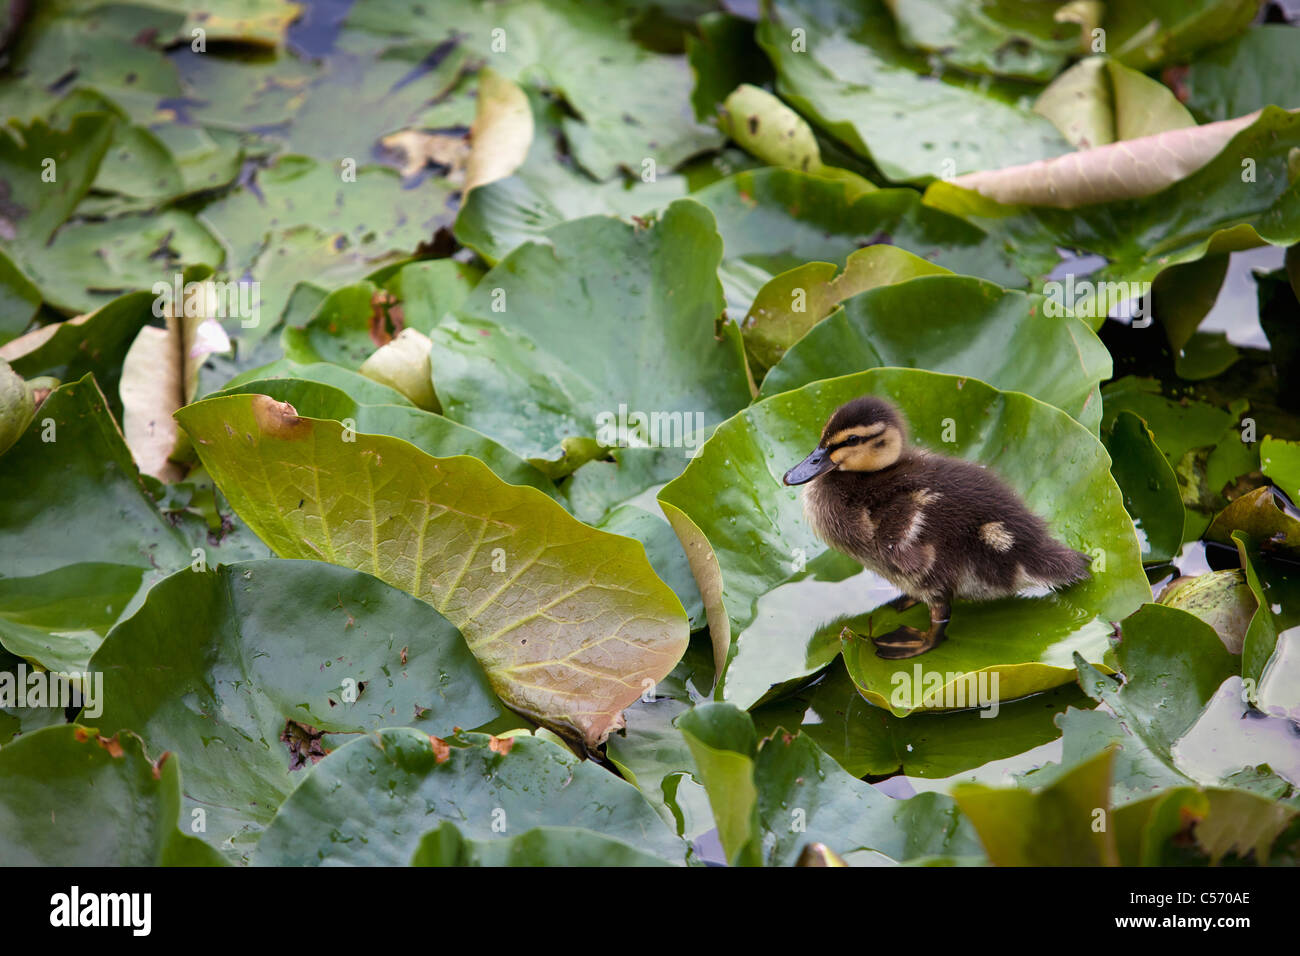 The Netherlands, 's-Graveland, Young duck, duckling in pond. Stock Photo